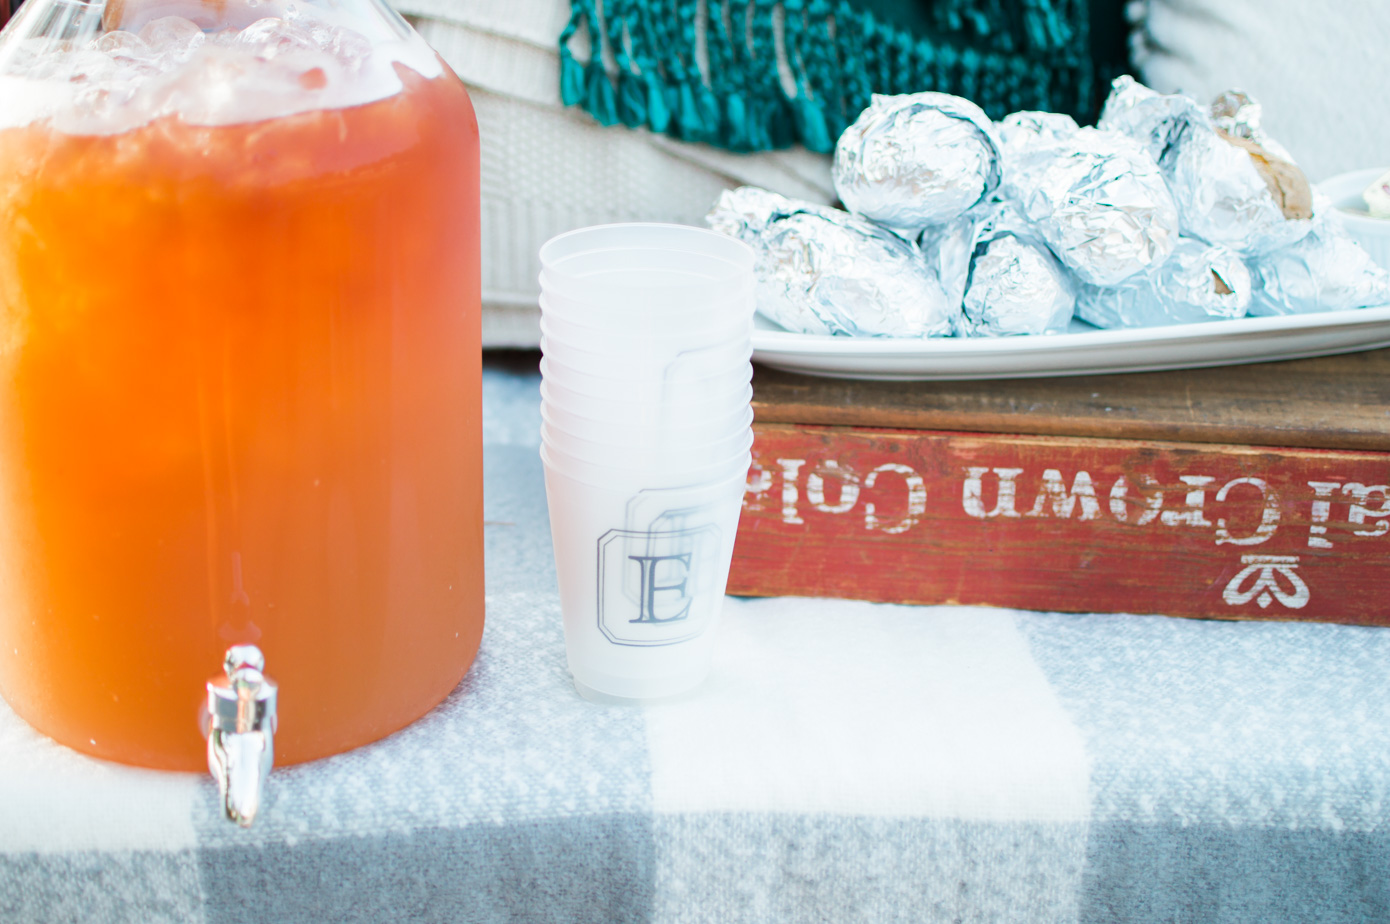 Cozy Chic Tailgate | McAlister's Deli Tailgate | Louella Reese Life & Style Blog